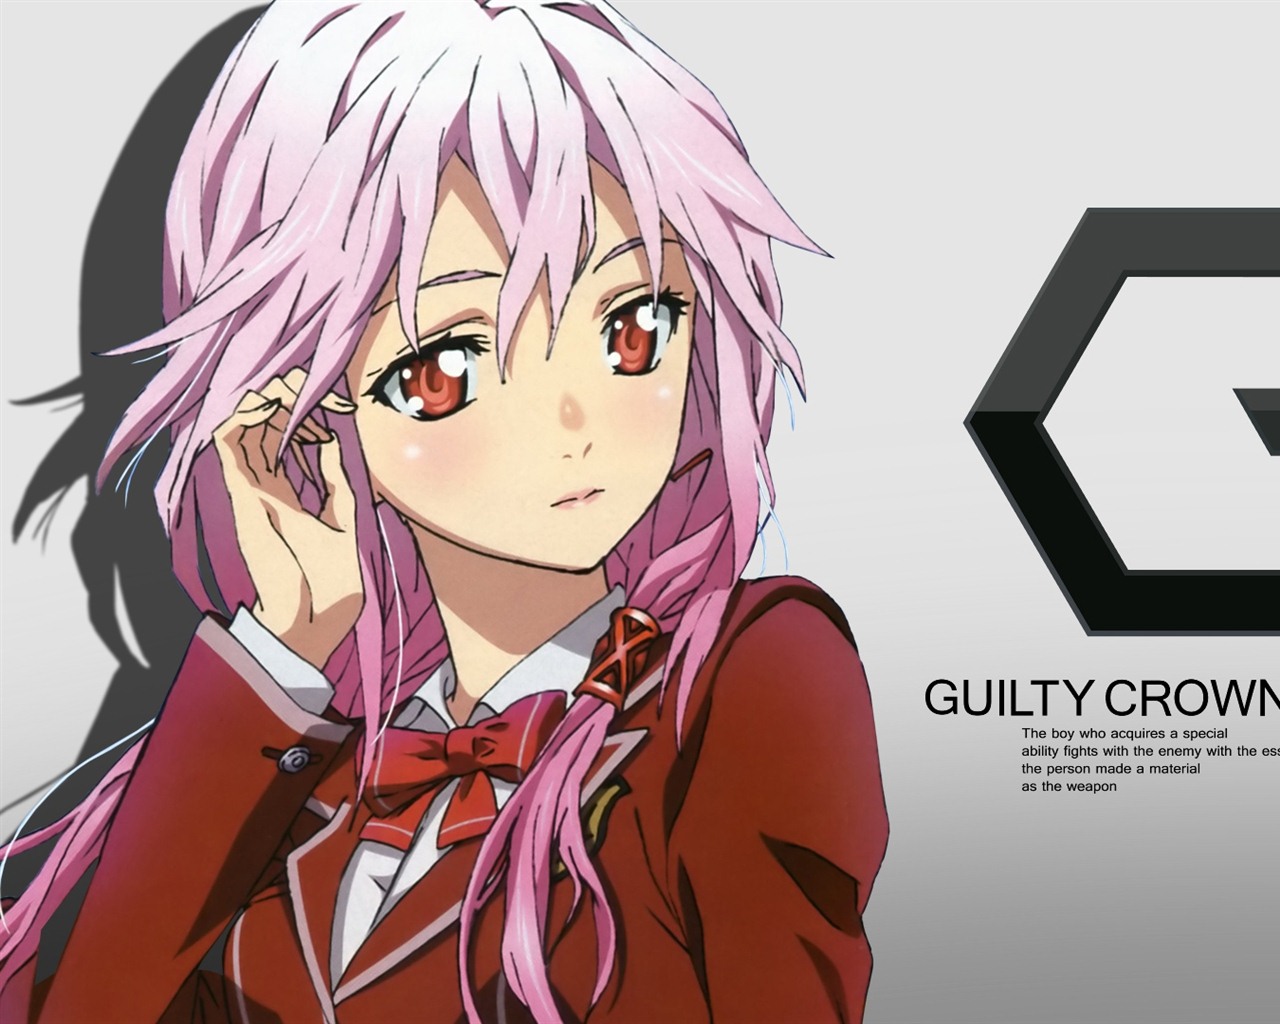 Guilty Crown 罪恶王冠 高清壁纸8 - 1280x1024